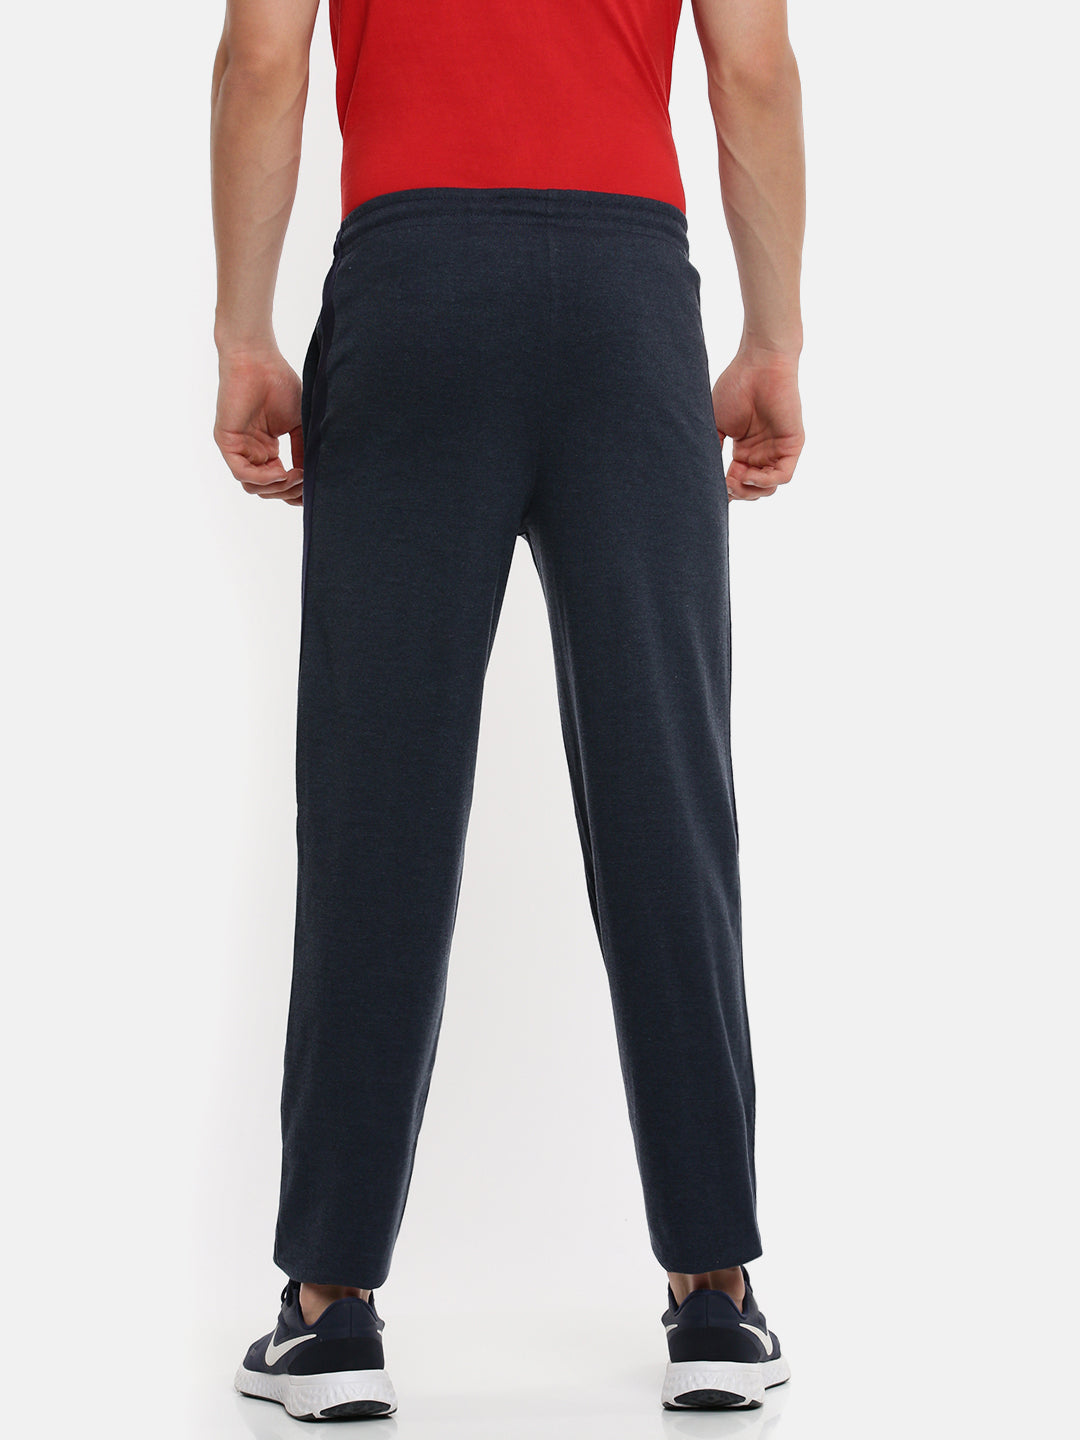 Mens Lower !Track pant !Joggar! Mens & Boys ! Lycra Pant for Gym Running  Exercise Casual Track